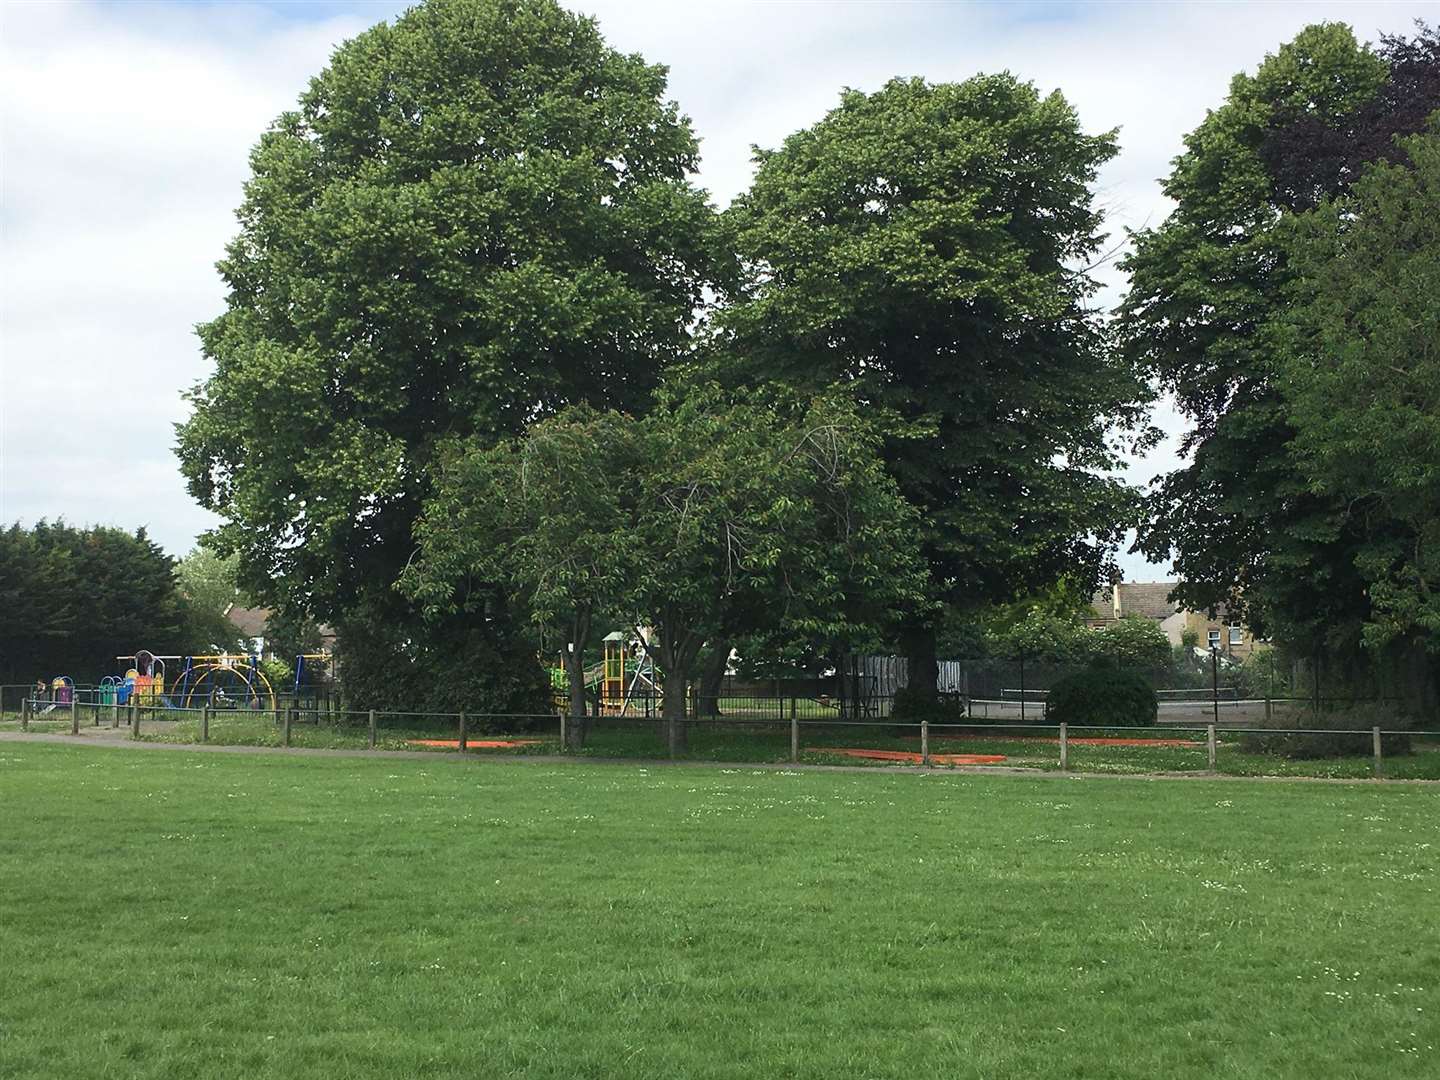 Woodlands Park, Gravesend, where the incident is reported to have taken place.